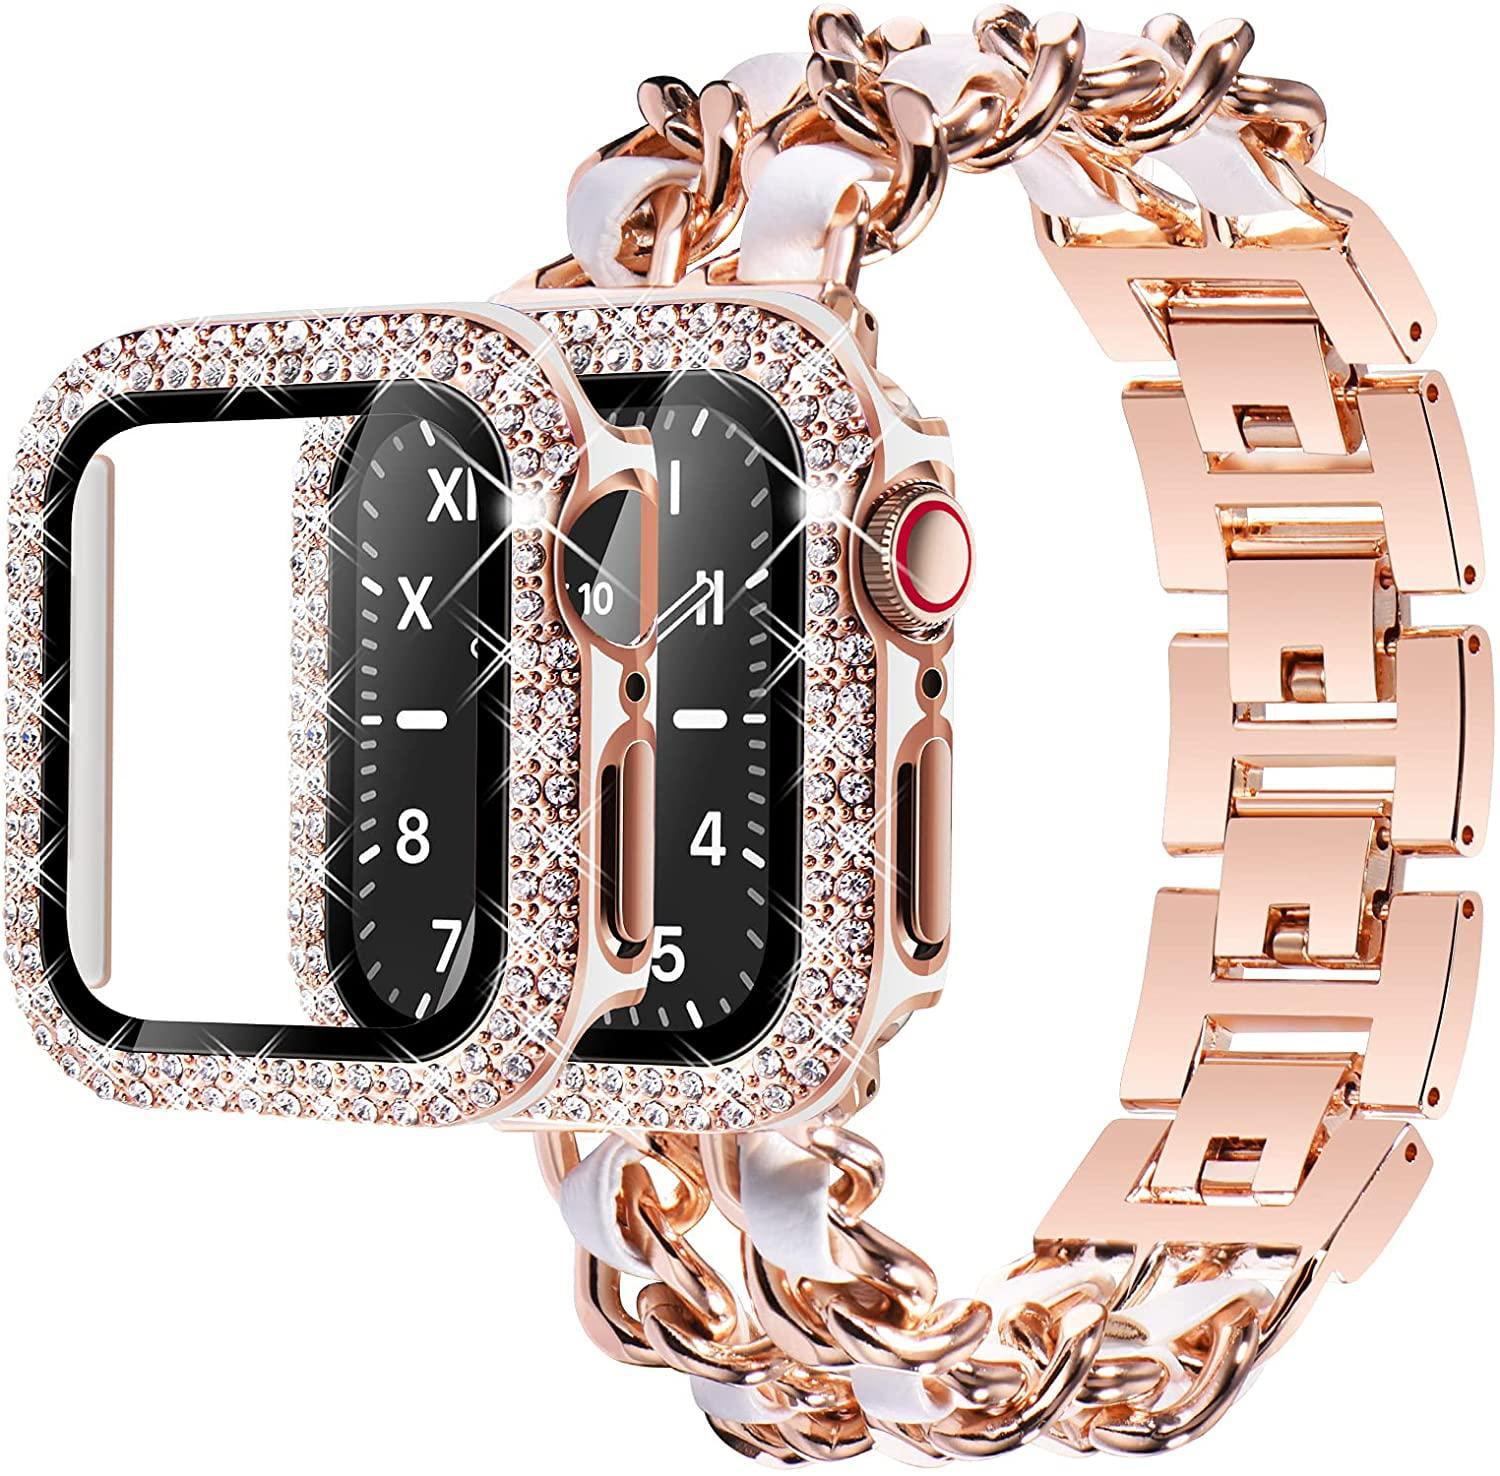 YuiYuKa Metal Stainless Steel Band Hard Strap Metal Link Series Cover 44mm with 45mm Apple and Case for Bumper for Watch Chain 42mm 38mm Leather 8 Interwoven iWatch Bling 41mm 40mm 7